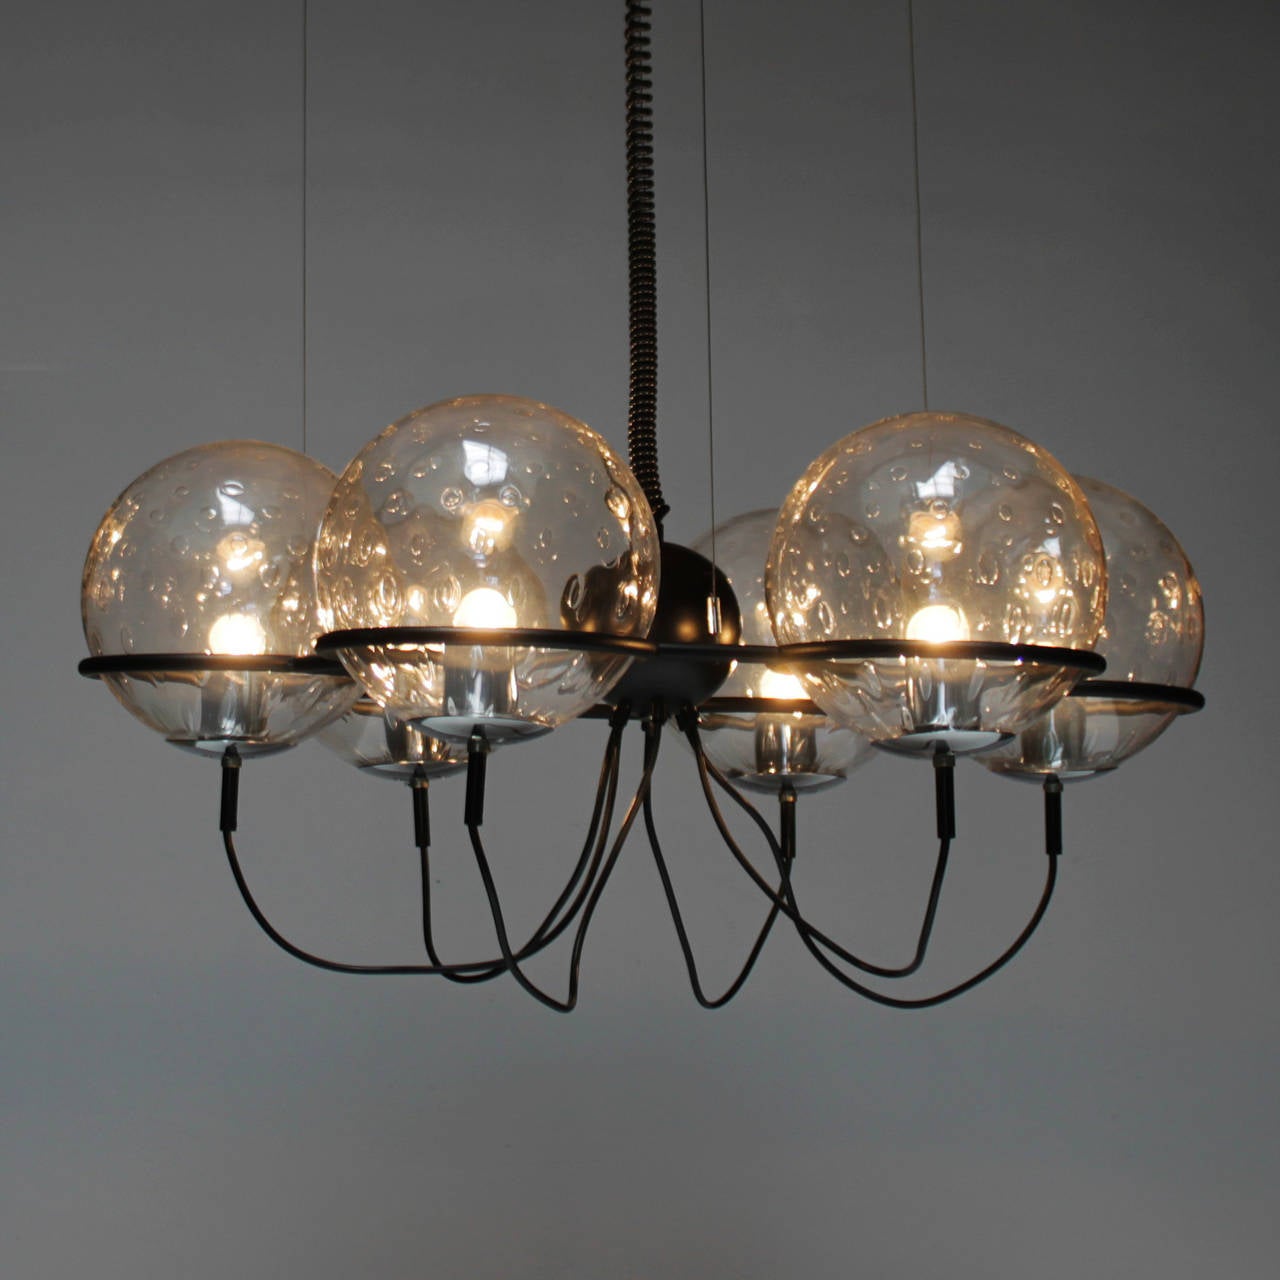 Saturnus chandelier by RAAK, Holland. Designed in the manner of Gino Sarfatti. Six glass globes each with a diameter of 10 inches. Adjustable height.